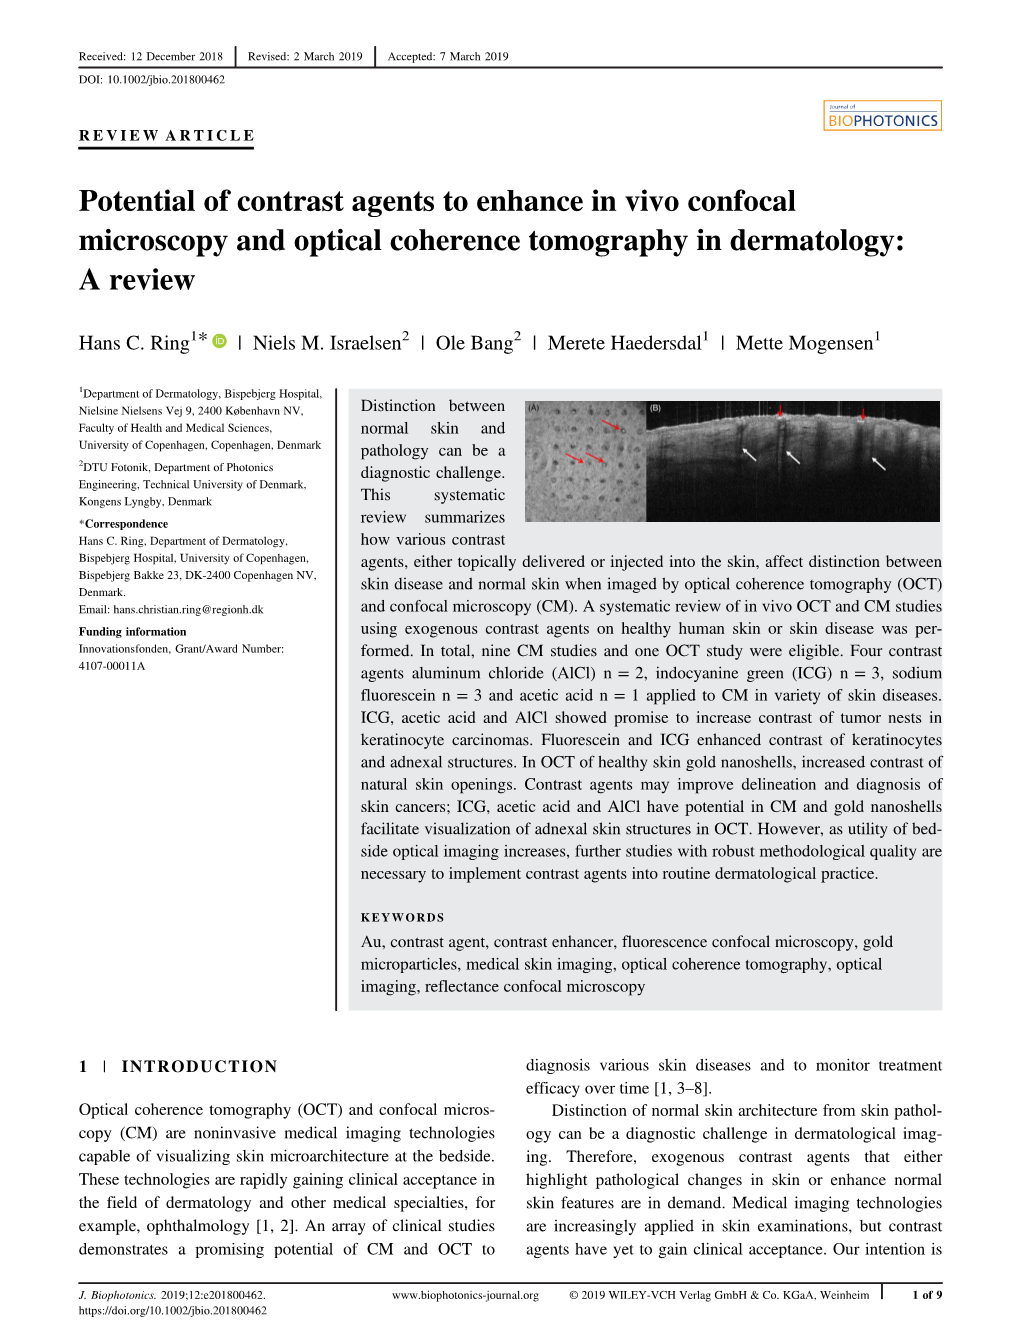 Potential of Contrast Agents to Enhance in Vivo Confocal Microscopy and Optical Coherence Tomography in Dermatology: a Review